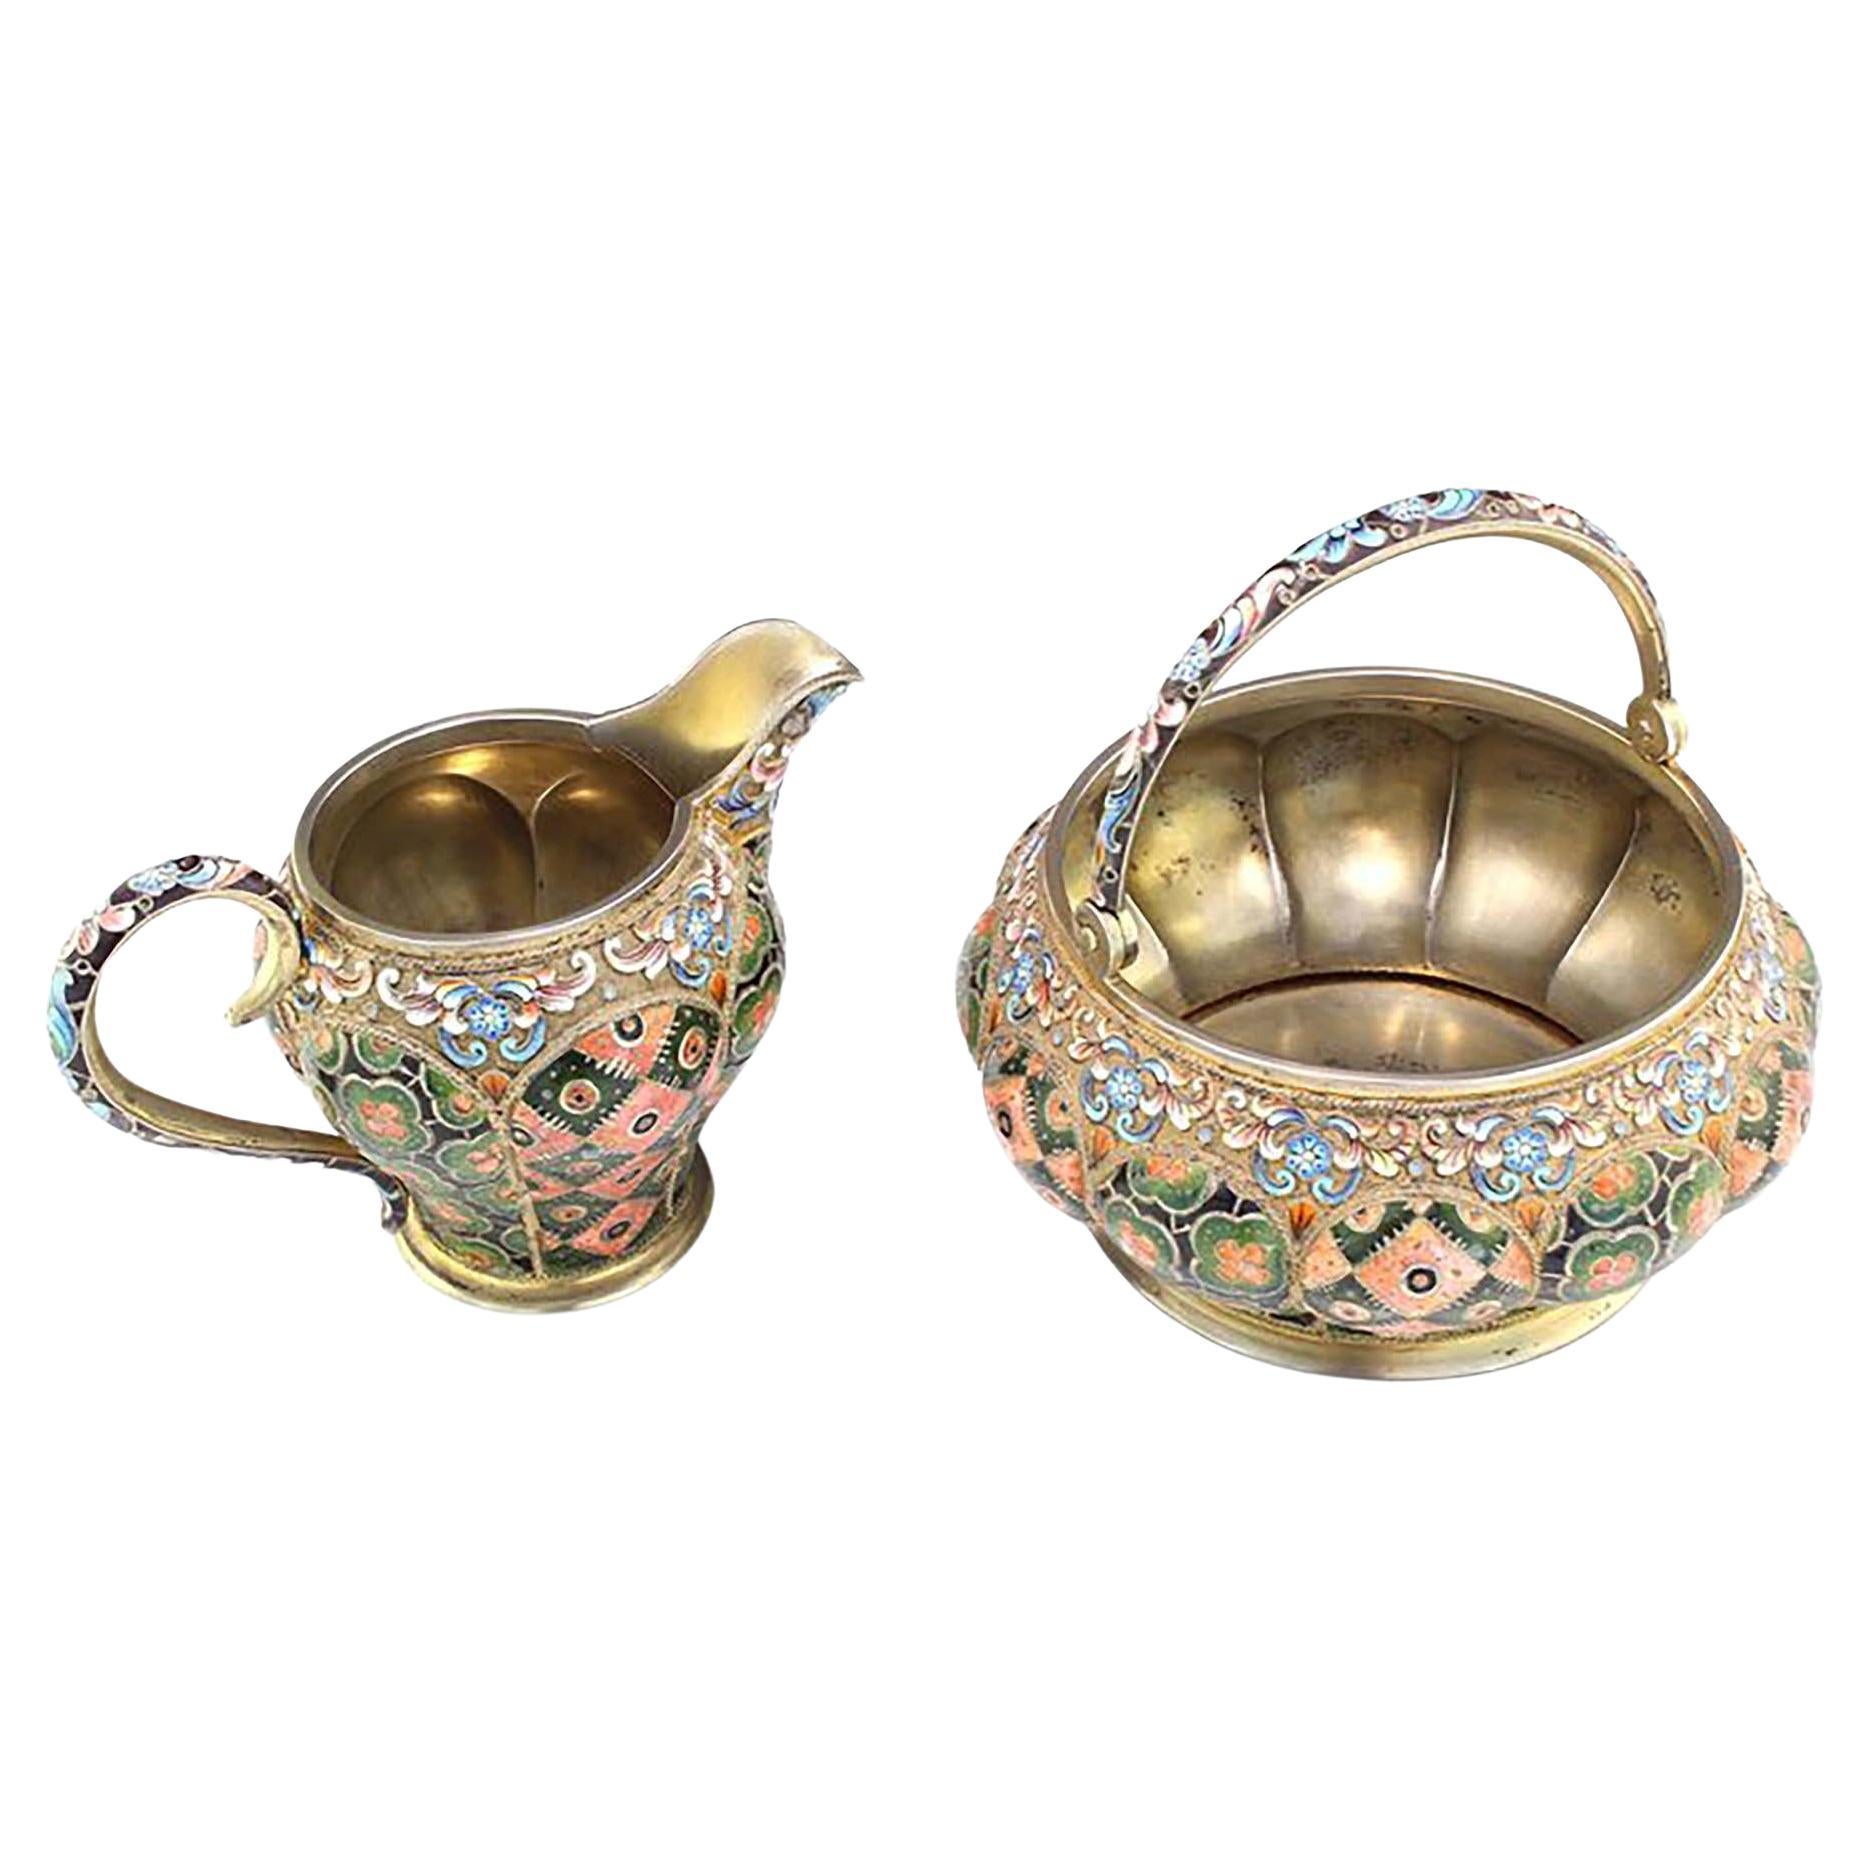 Russia Silver-Gilt and Cloisonné Enamel Sugar Bowl and Creamer